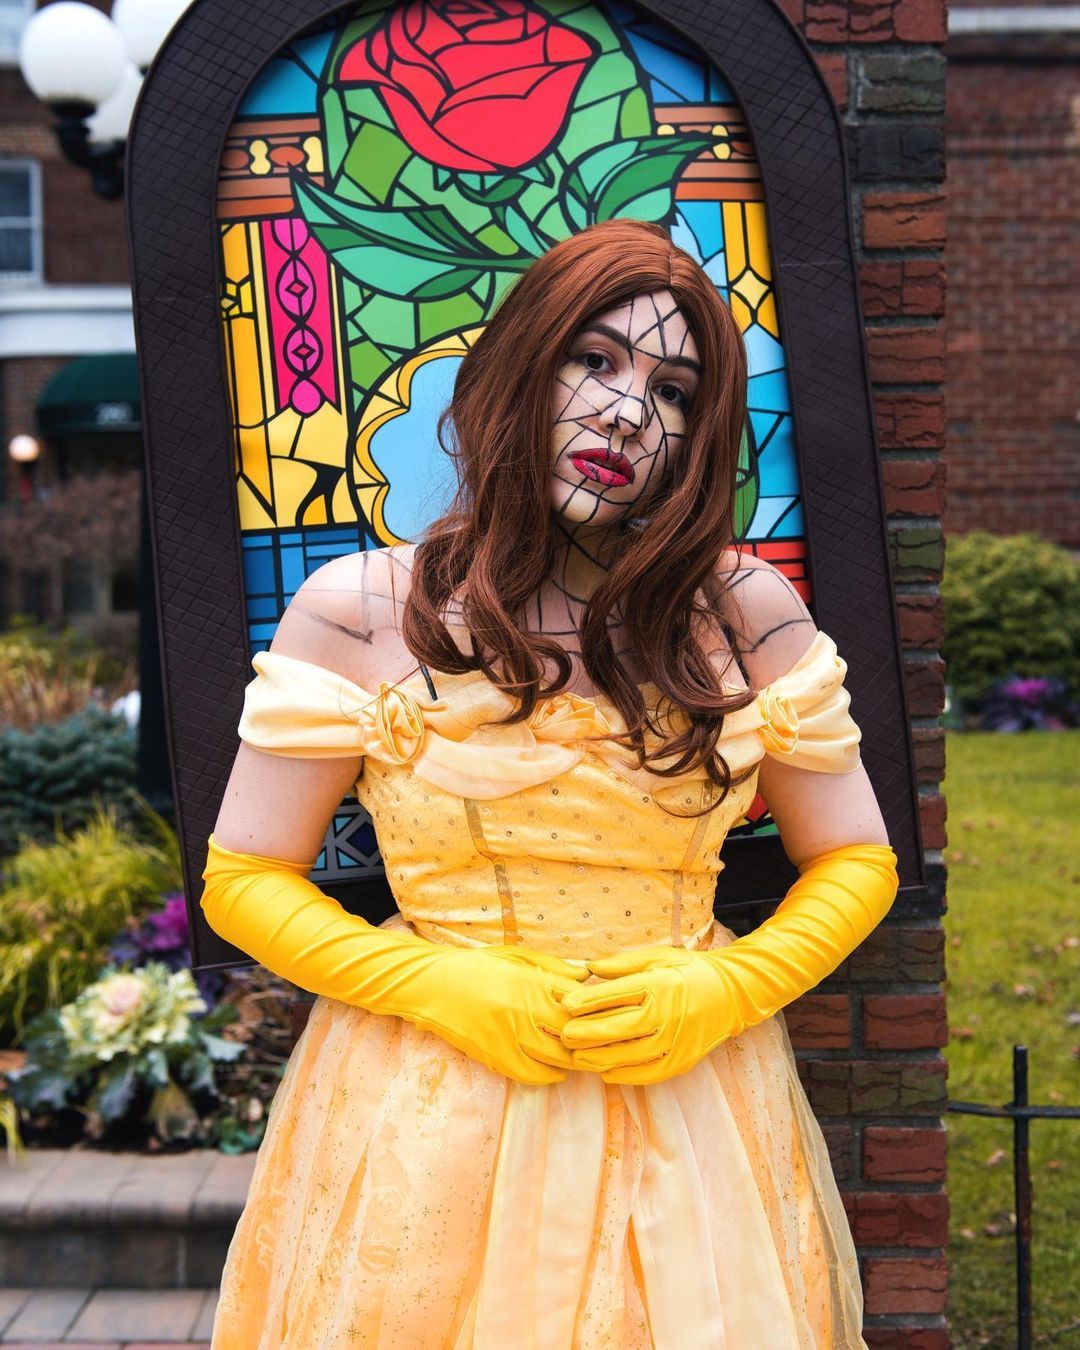 Stained Glass Belle from Beauty & the Beast : yaldamn // photo: @allisonthephotographer
Belle has always been one of my favorite Disney princesses but I had never found the motivation to cosplay her. People had already done gorgeous interpretations...